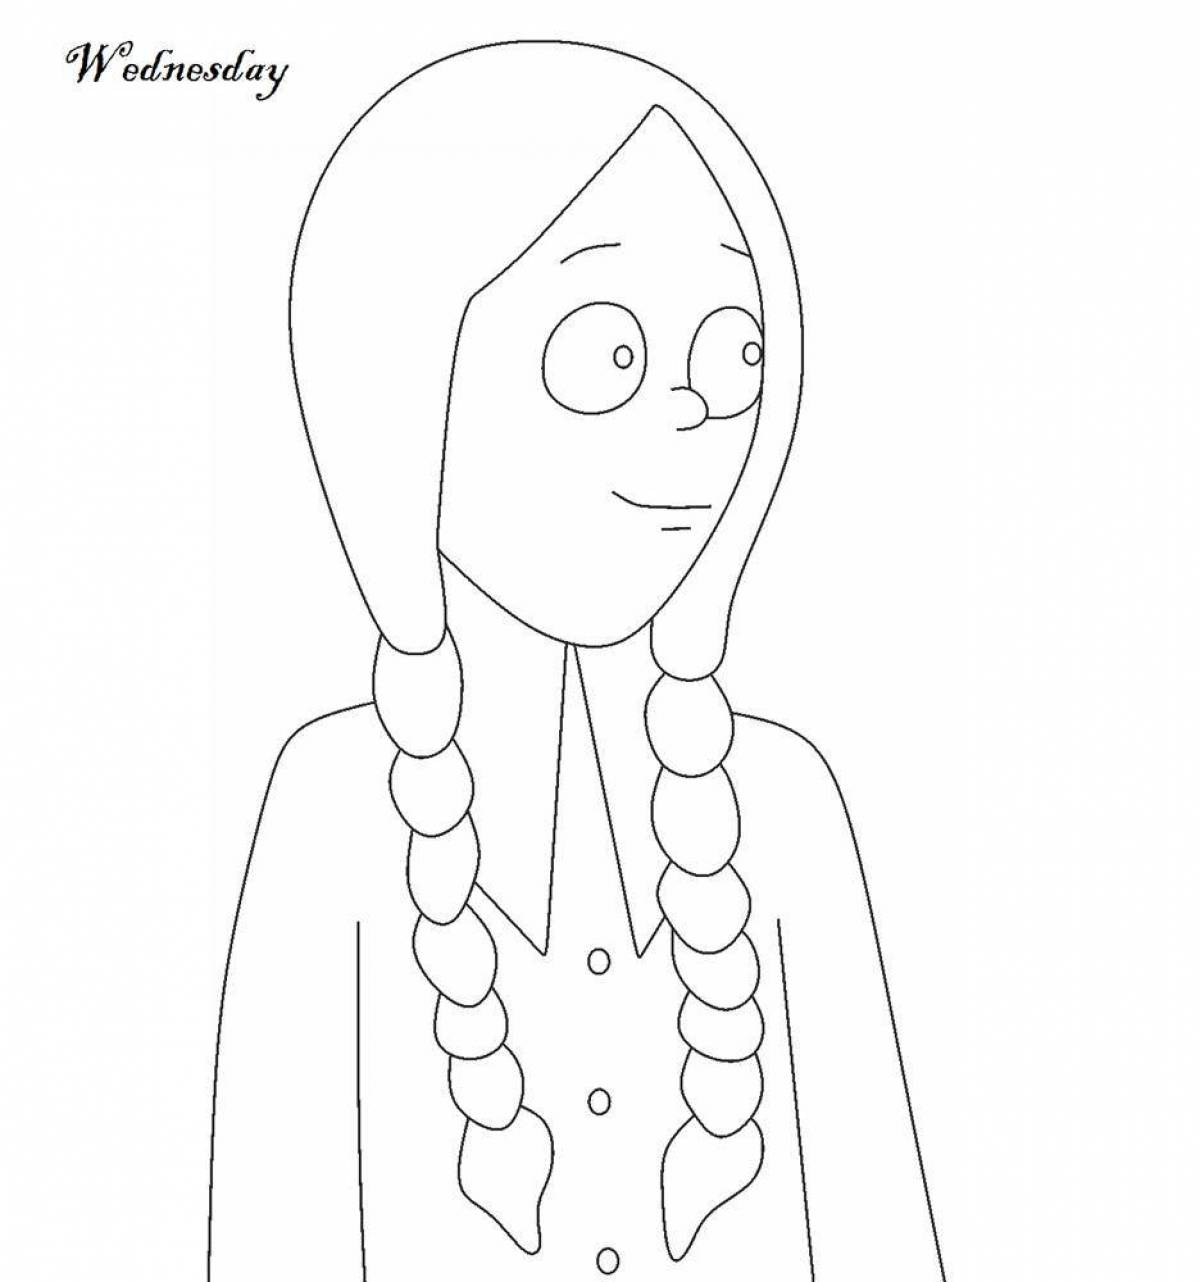 Radiant Wednesday coloring page